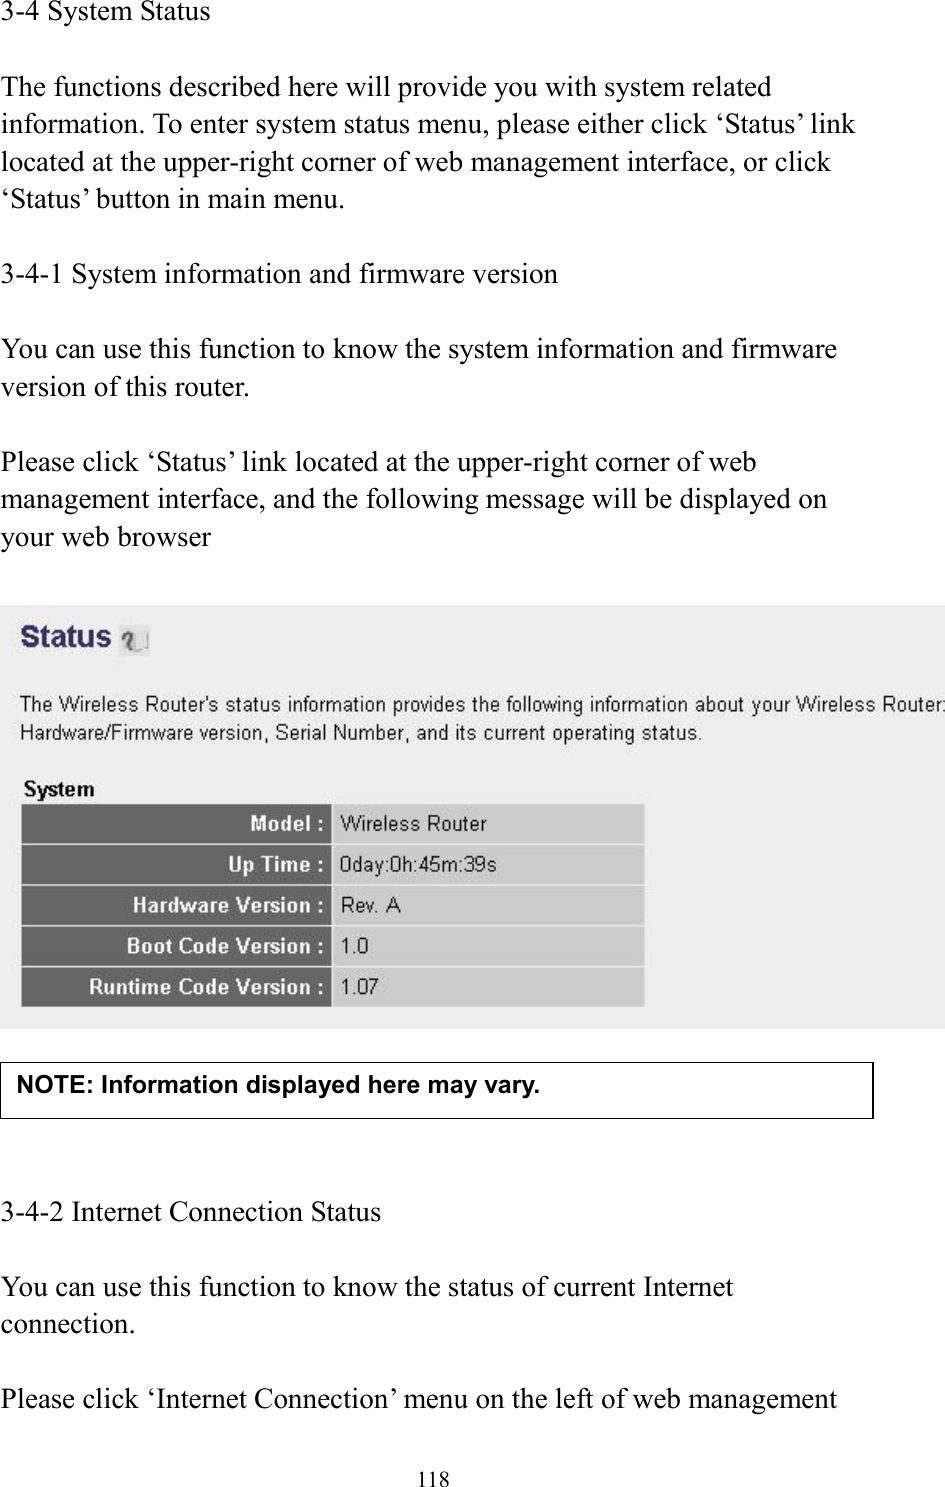 118 3-4 System Status  The functions described here will provide you with system related information. To enter system status menu, please either click ‘Status’ link located at the upper-right corner of web management interface, or click ‘Status’ button in main menu.  3-4-1 System information and firmware version  You can use this function to know the system information and firmware version of this router.  Please click ‘Status’ link located at the upper-right corner of web management interface, and the following message will be displayed on your web browser       3-4-2 Internet Connection Status  You can use this function to know the status of current Internet connection.  Please click ‘Internet Connection’ menu on the left of web management NOTE: Information displayed here may vary. 